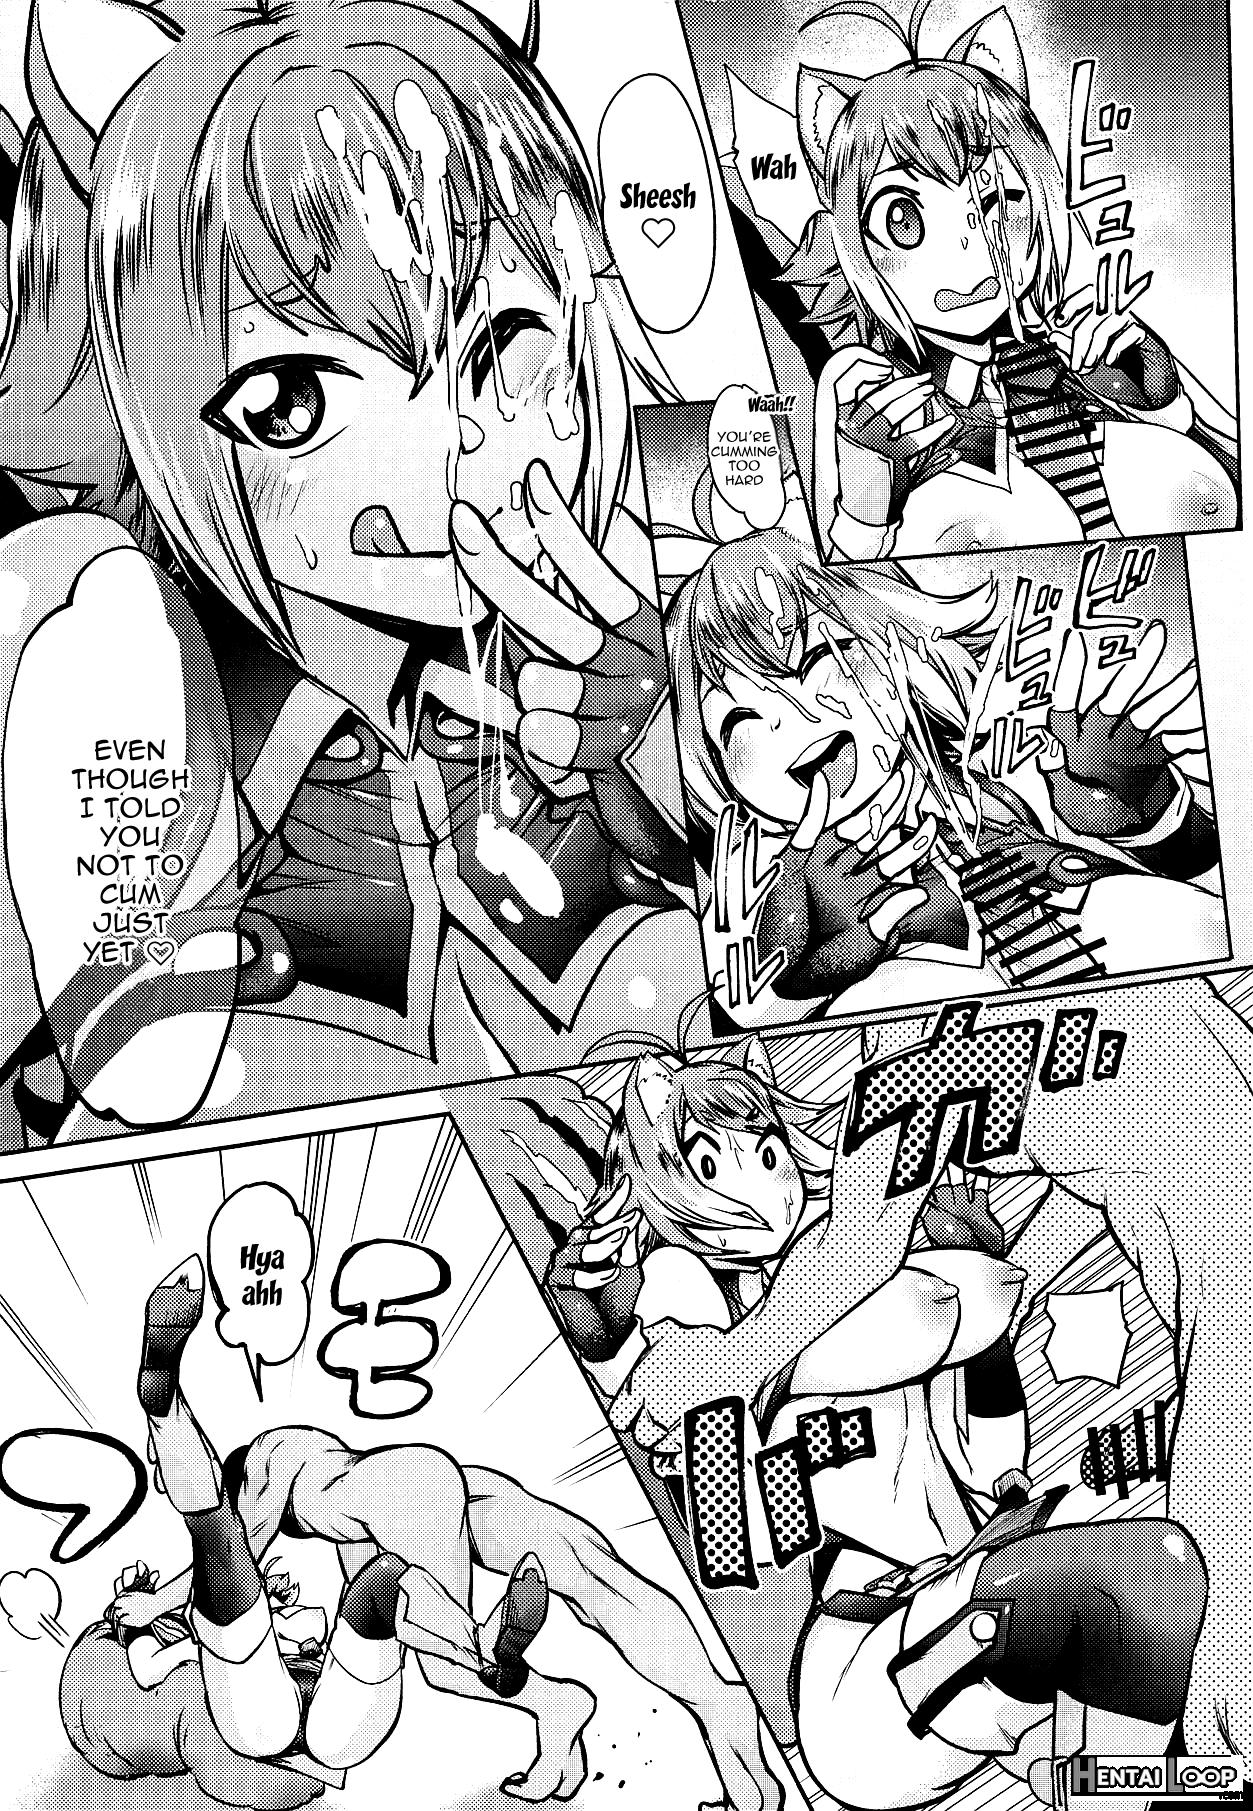 Together With Makoto page 9